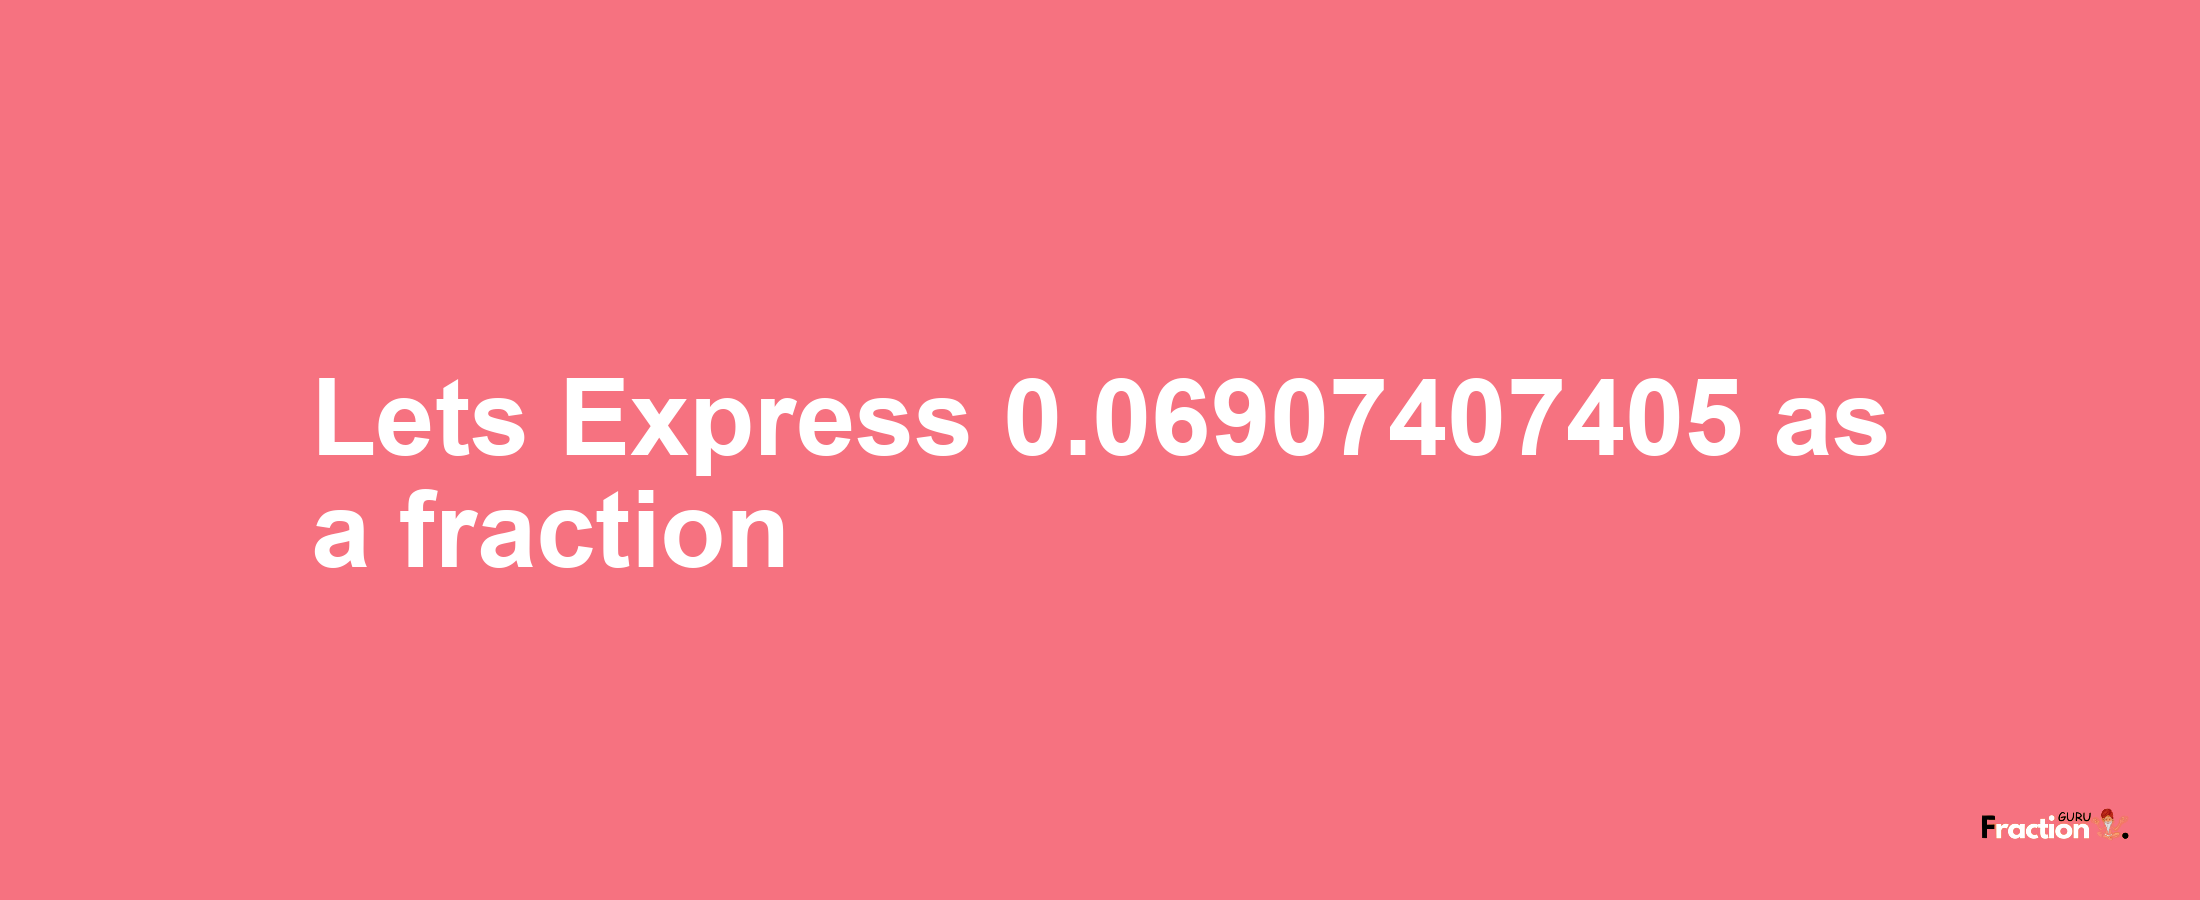 Lets Express 0.06907407405 as afraction